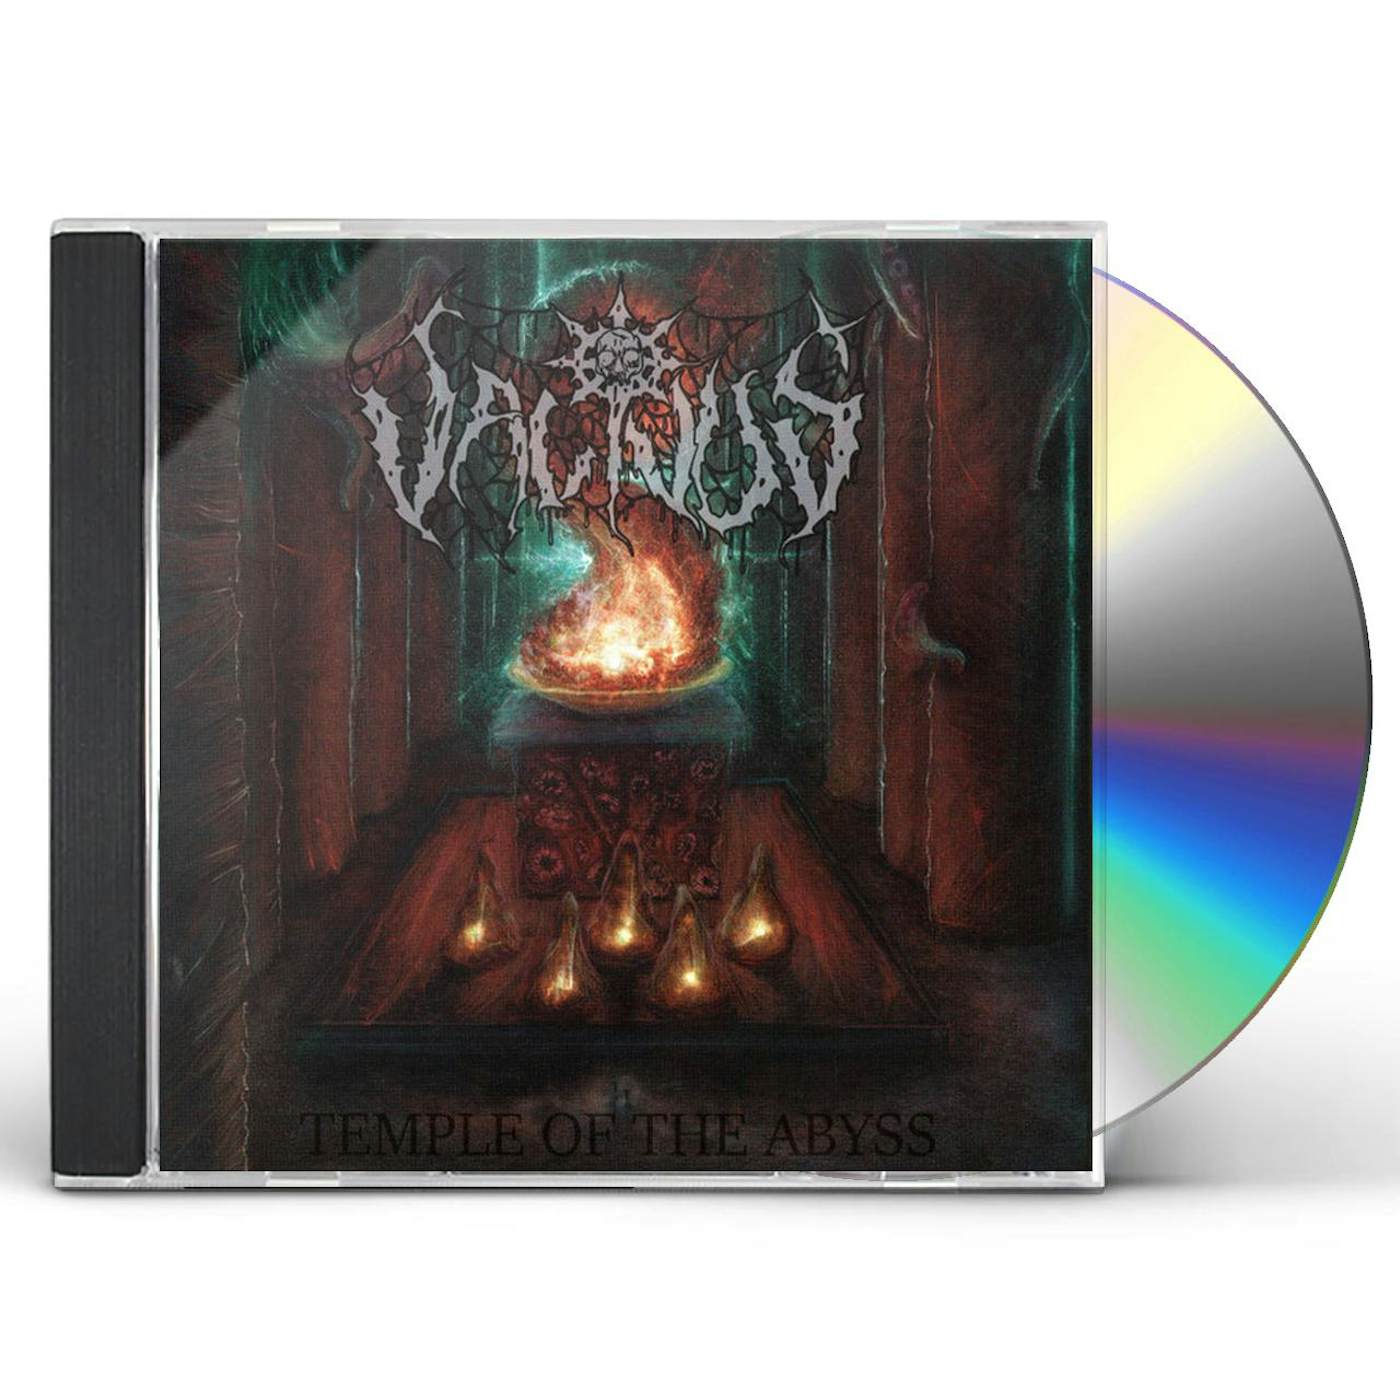 Vacivus TEMPLE OF THE ABYSS CD